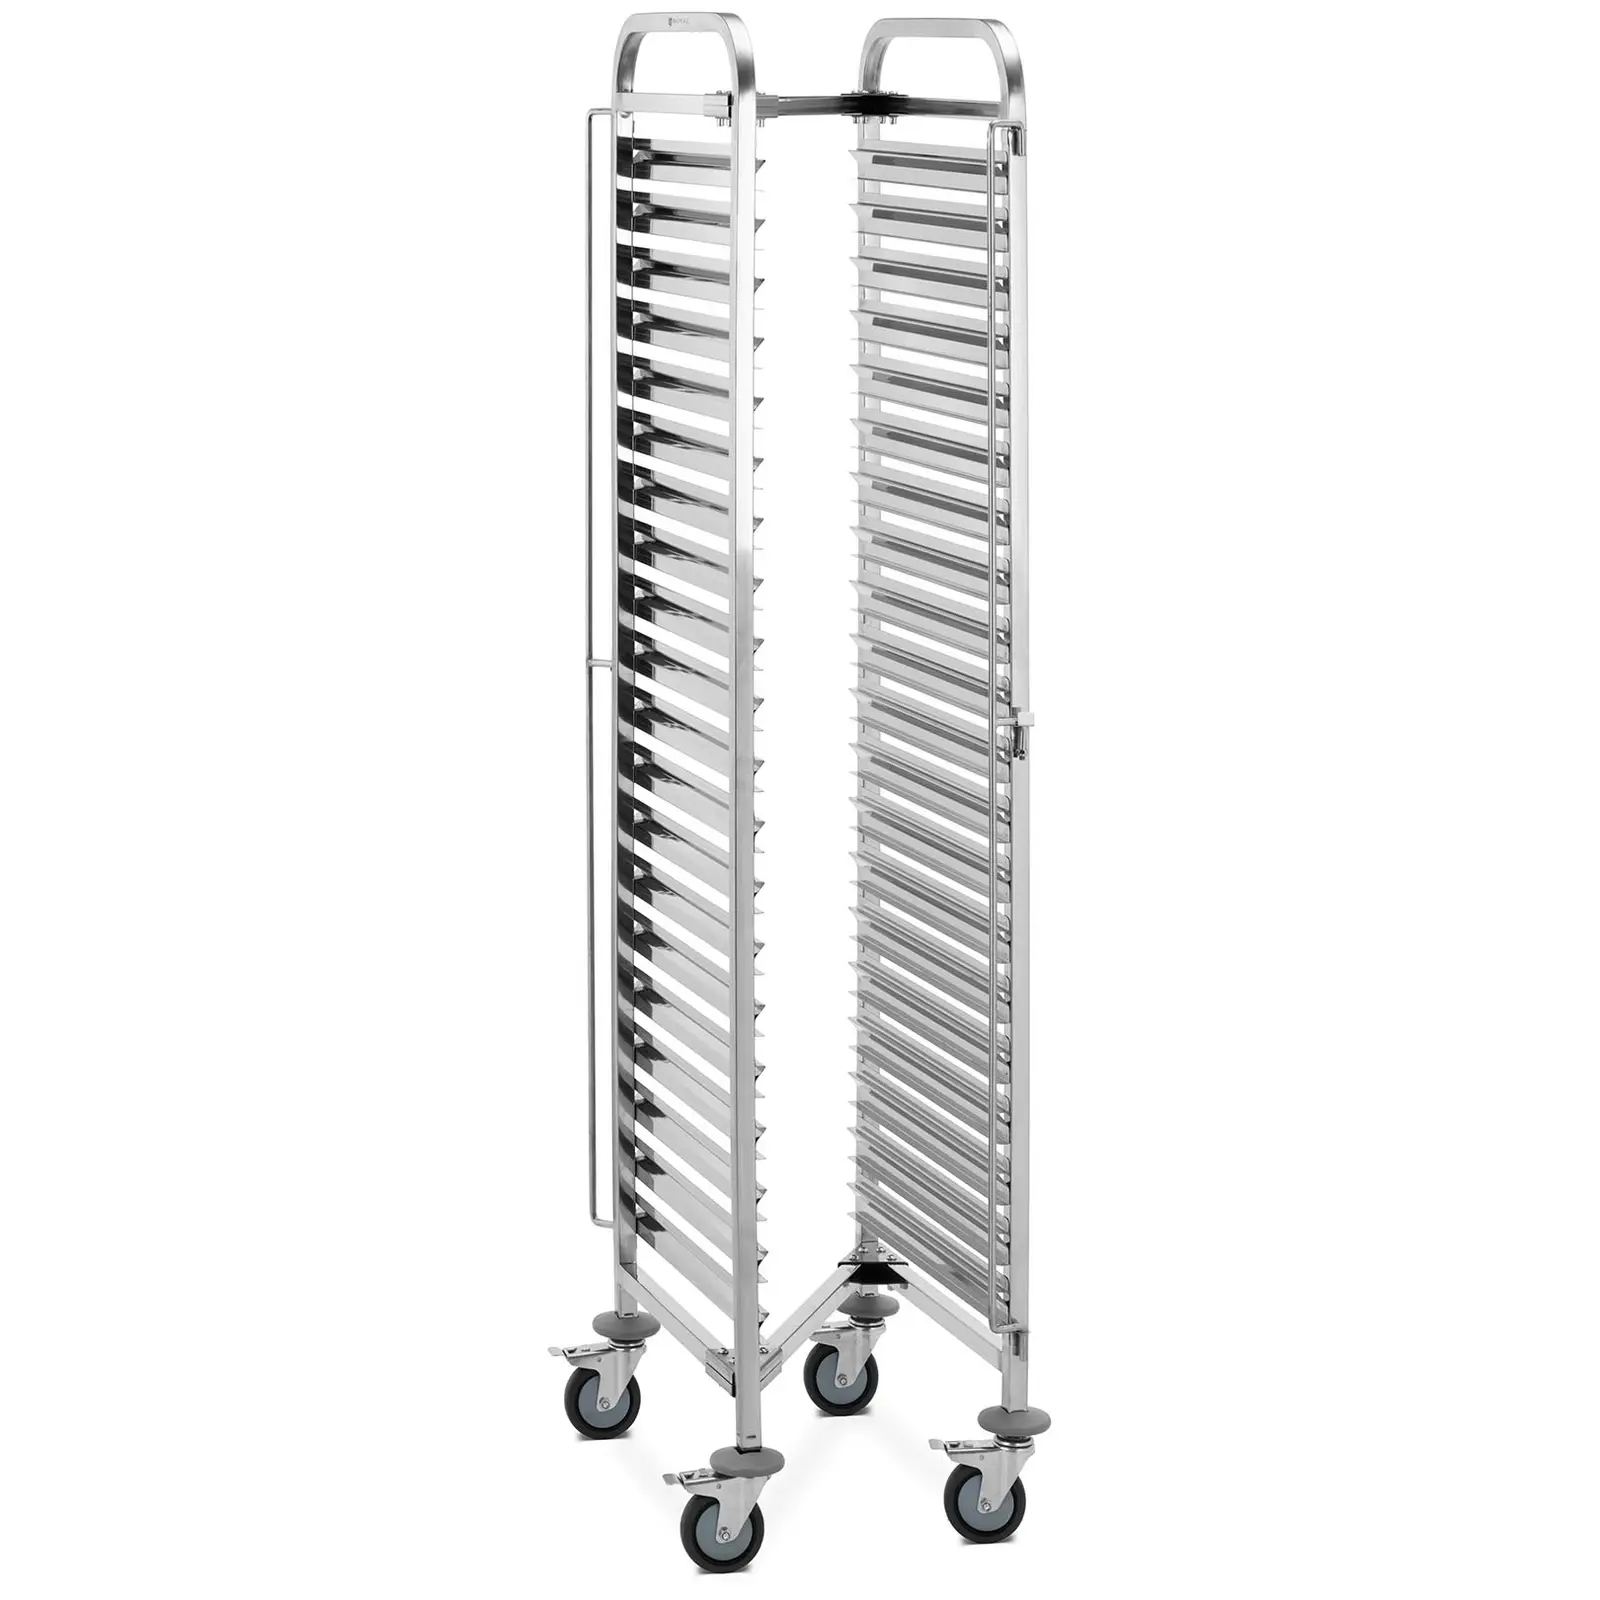 Tray Trolley - 20 GN 1/1 or 30 GN 1/3 racks - Royal Catering